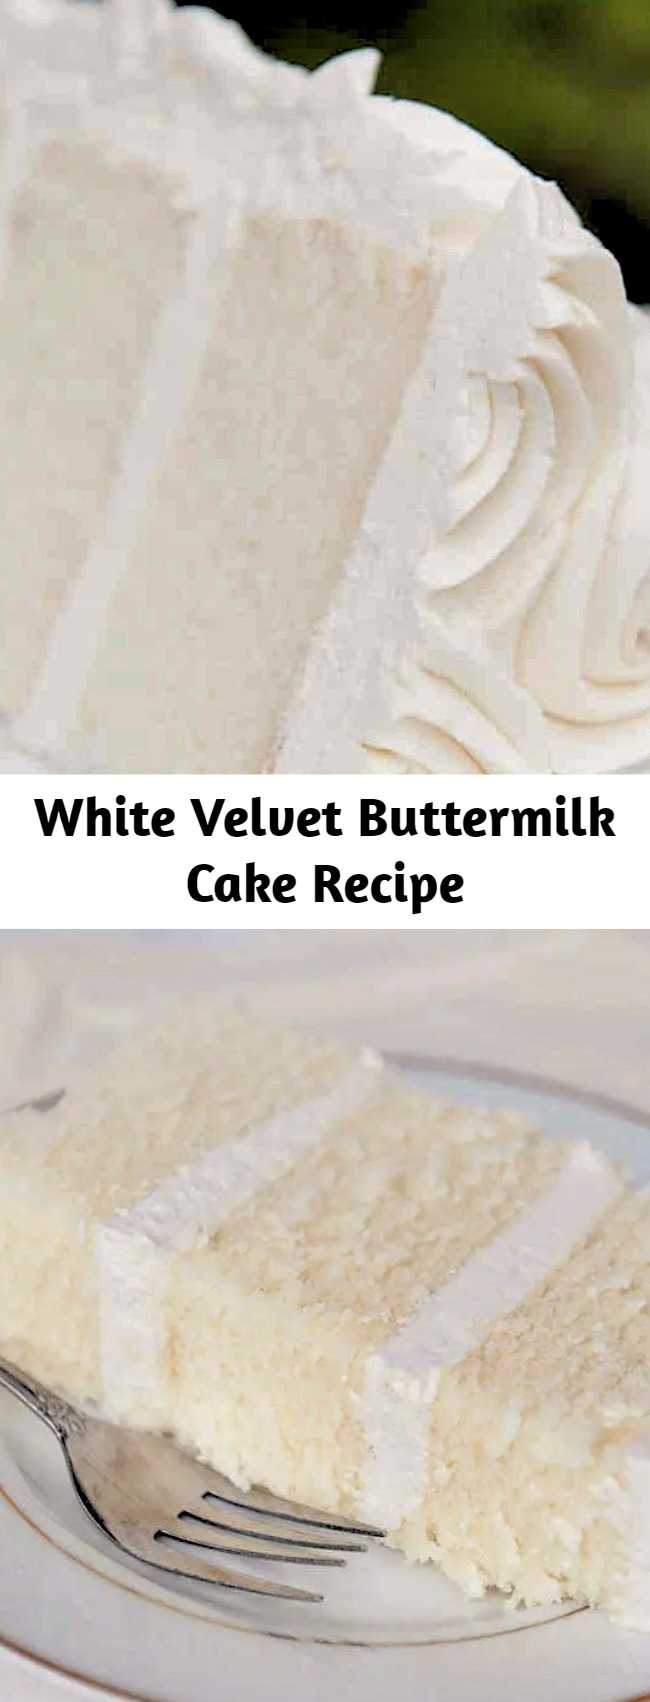 White velvet cake gets it's flavor and velvety texture from buttermilk. A moist, tender cake that is great for any special occasion. This recipe makes two 8" round cakes about 2" tall. Bake at 335F for 30-35 minutes until a toothpick comes out cleanly.